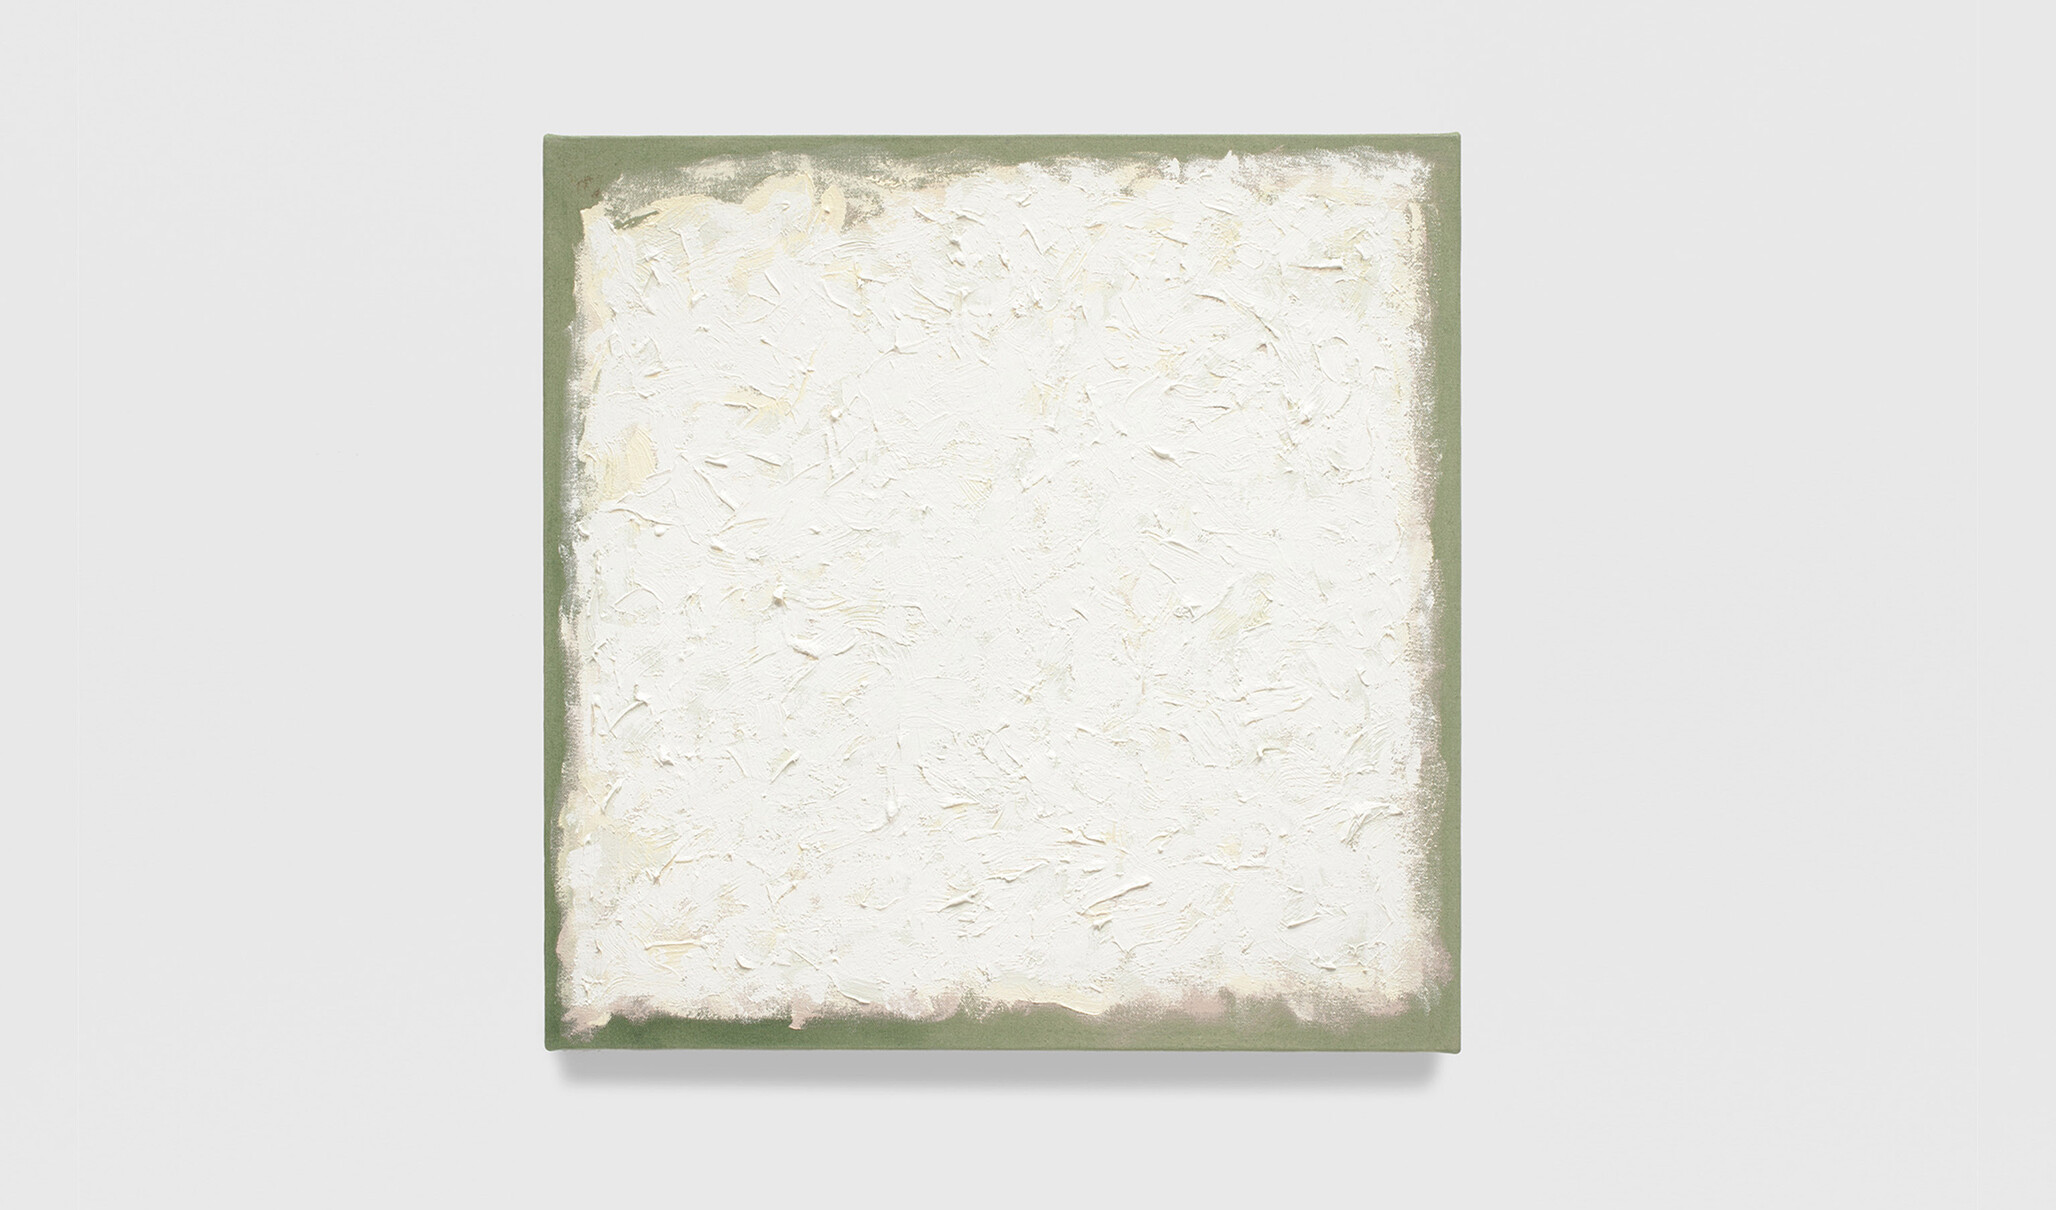 A painting by Robert Ryman, titled Untitled, dated 2010.